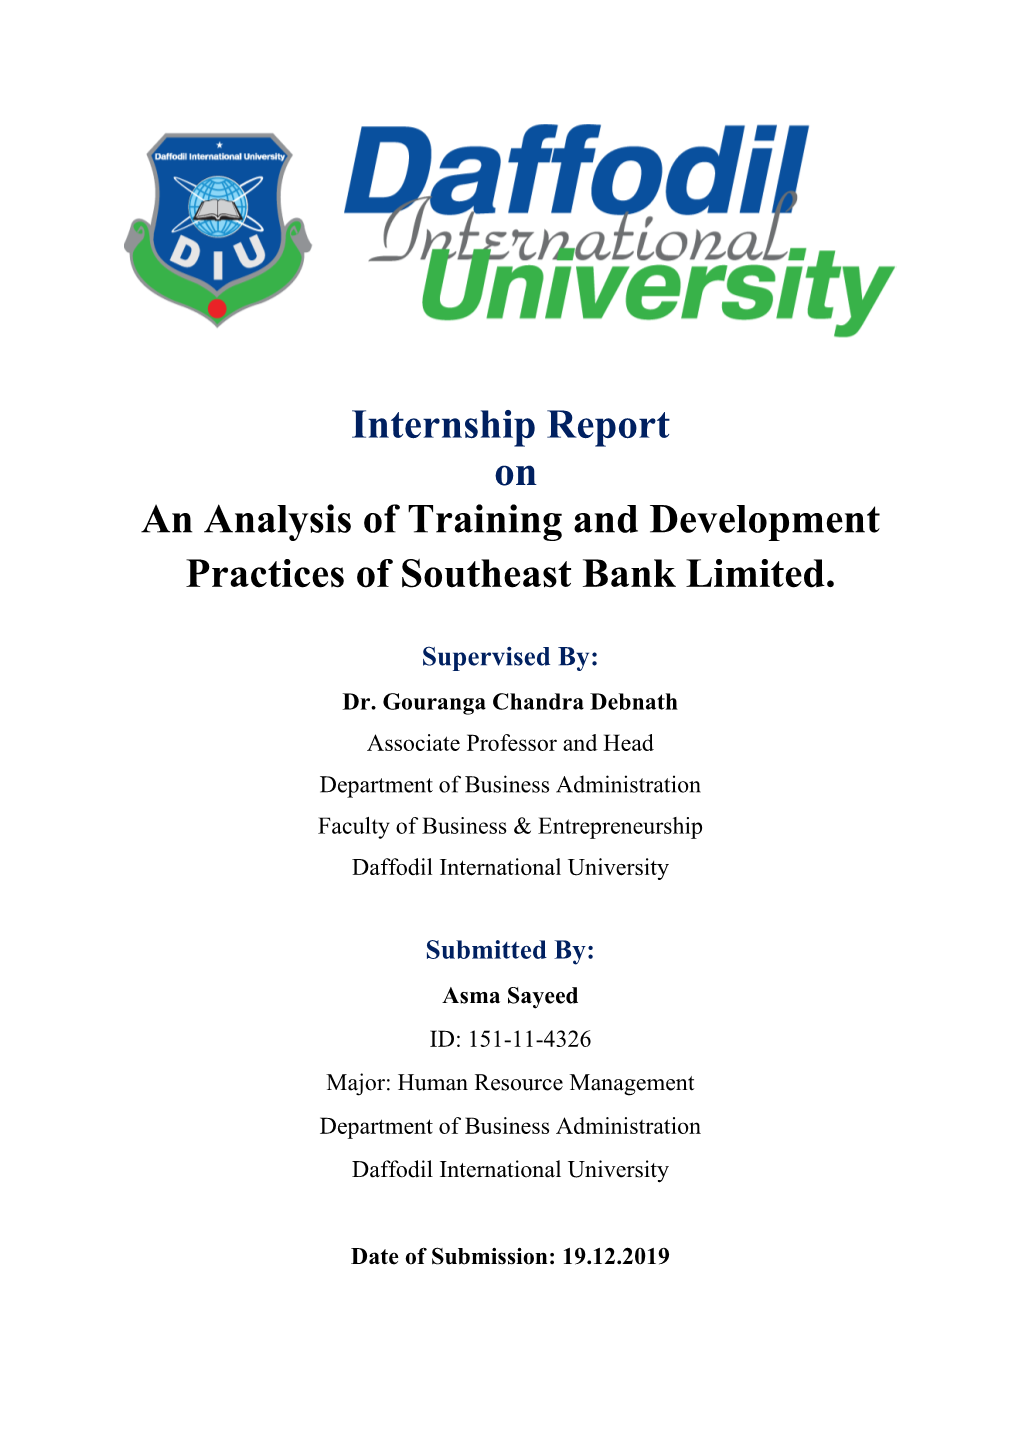 Internship Report on an Analysis of Training and Development Practices of Southeast Bank Limited